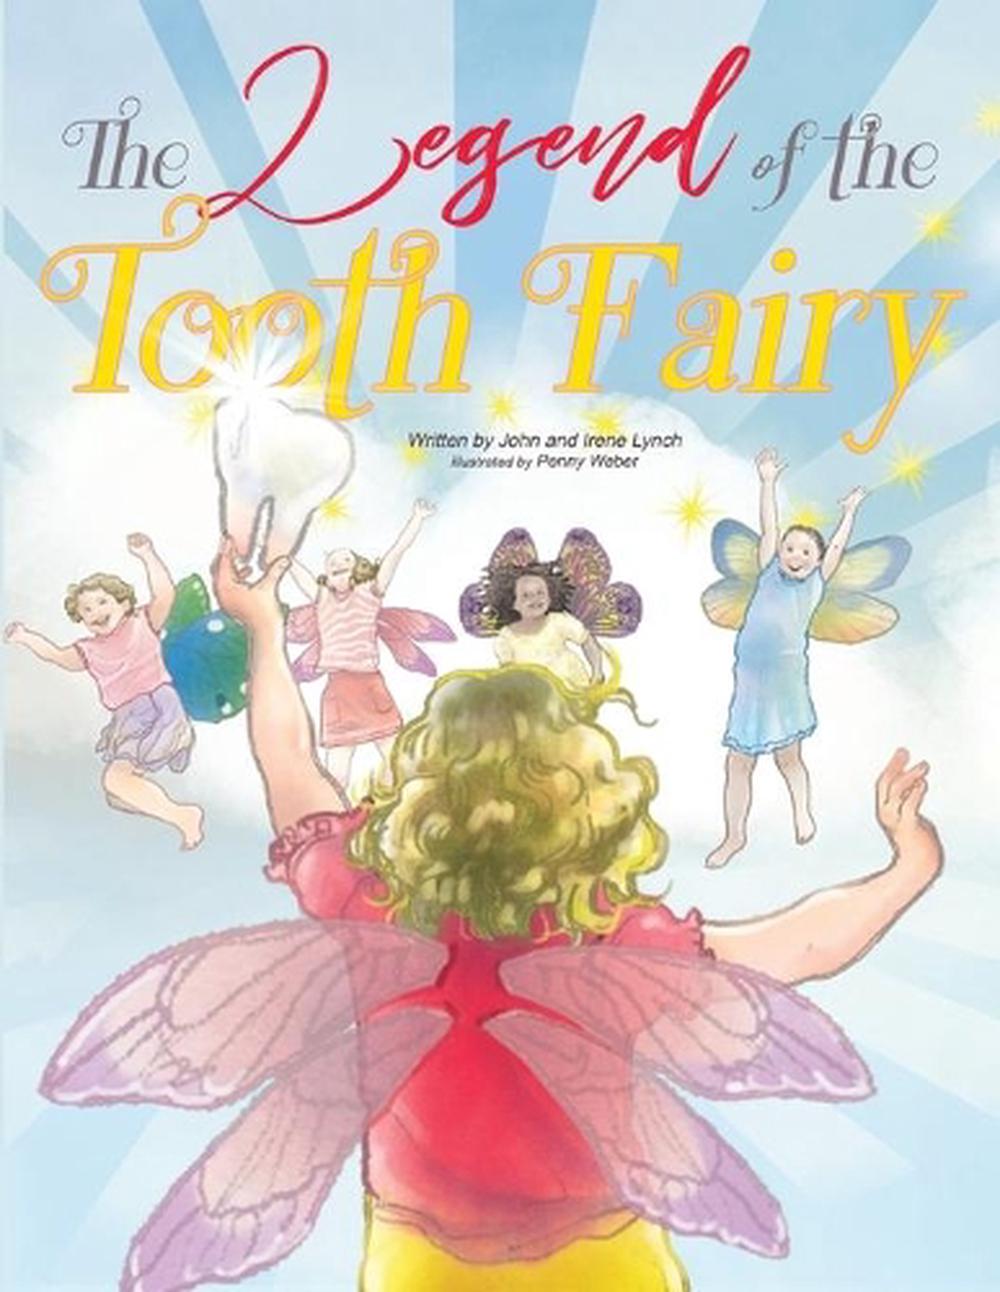 toothfairy book